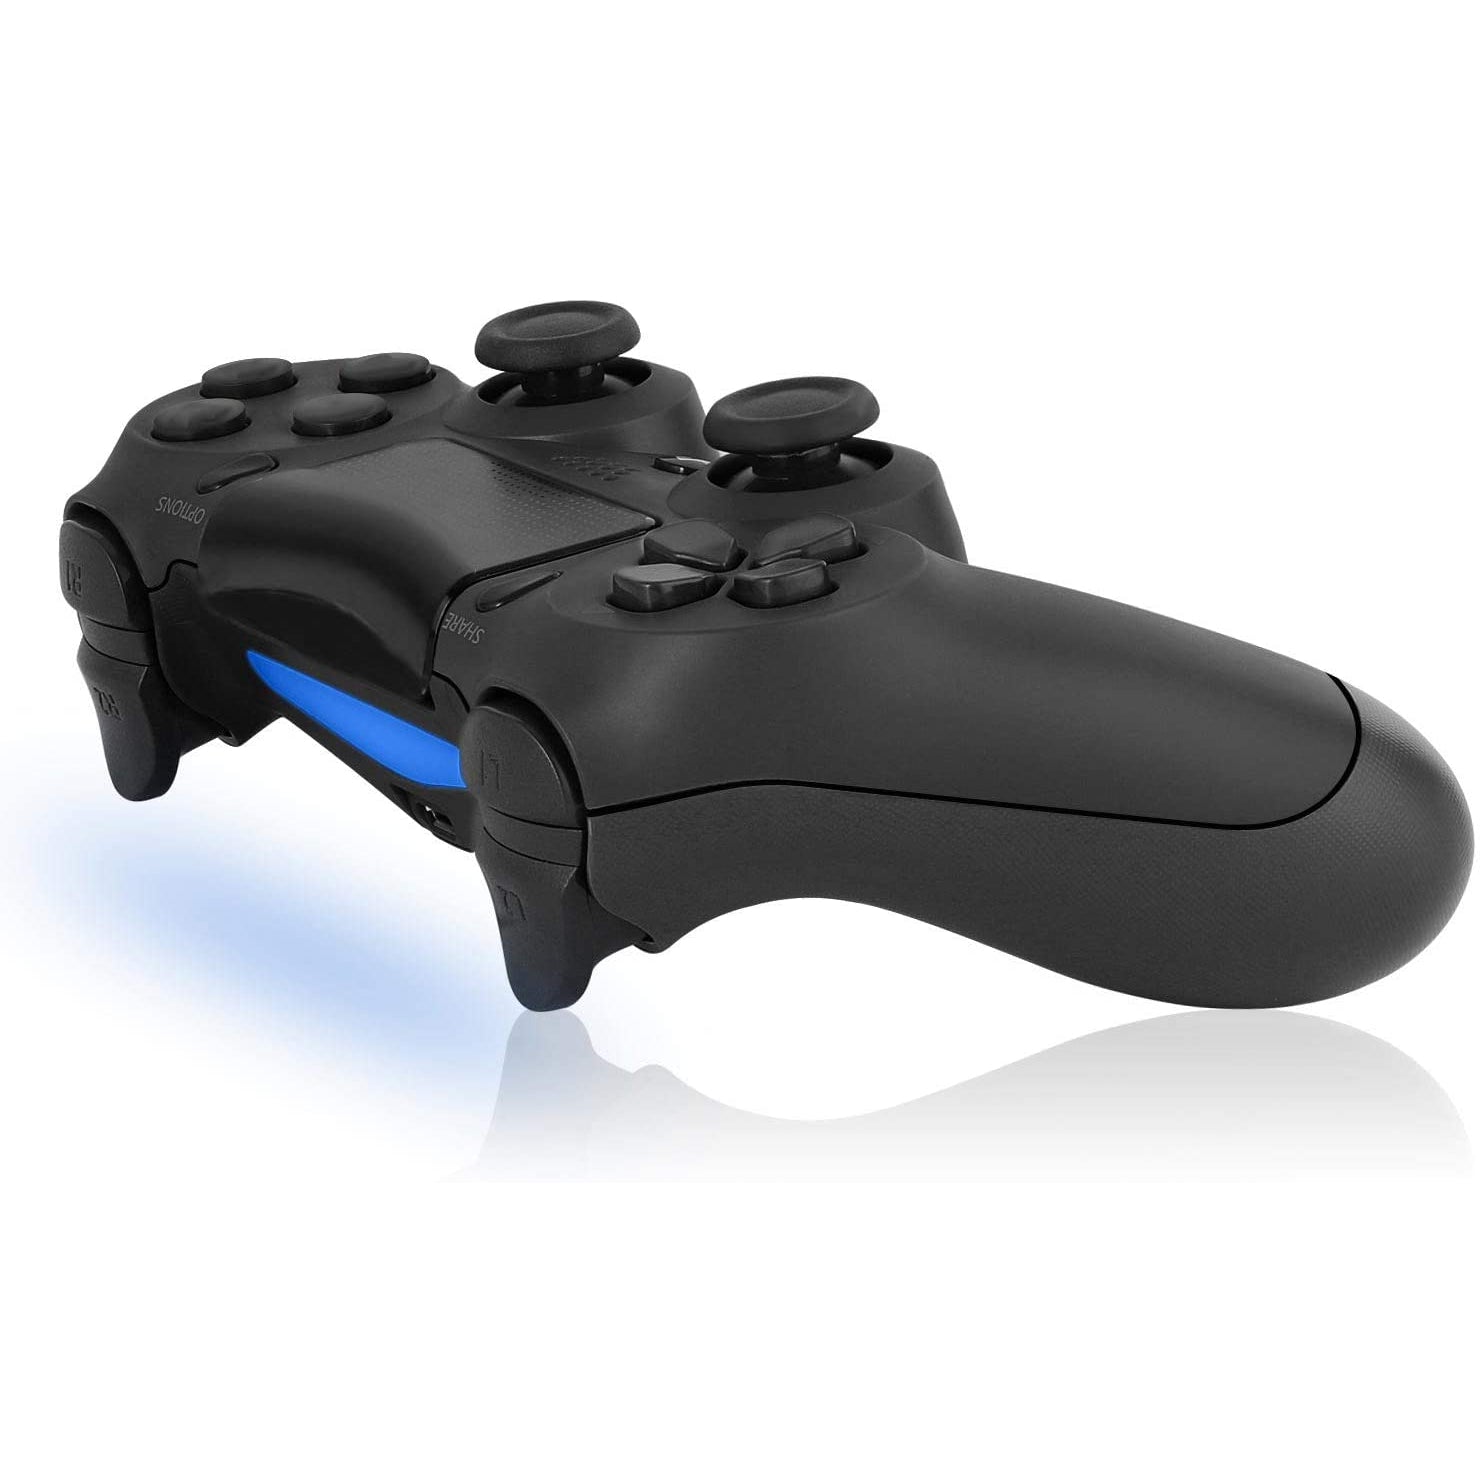 Doubleshock 4 PS4 Wireless Controller - Black